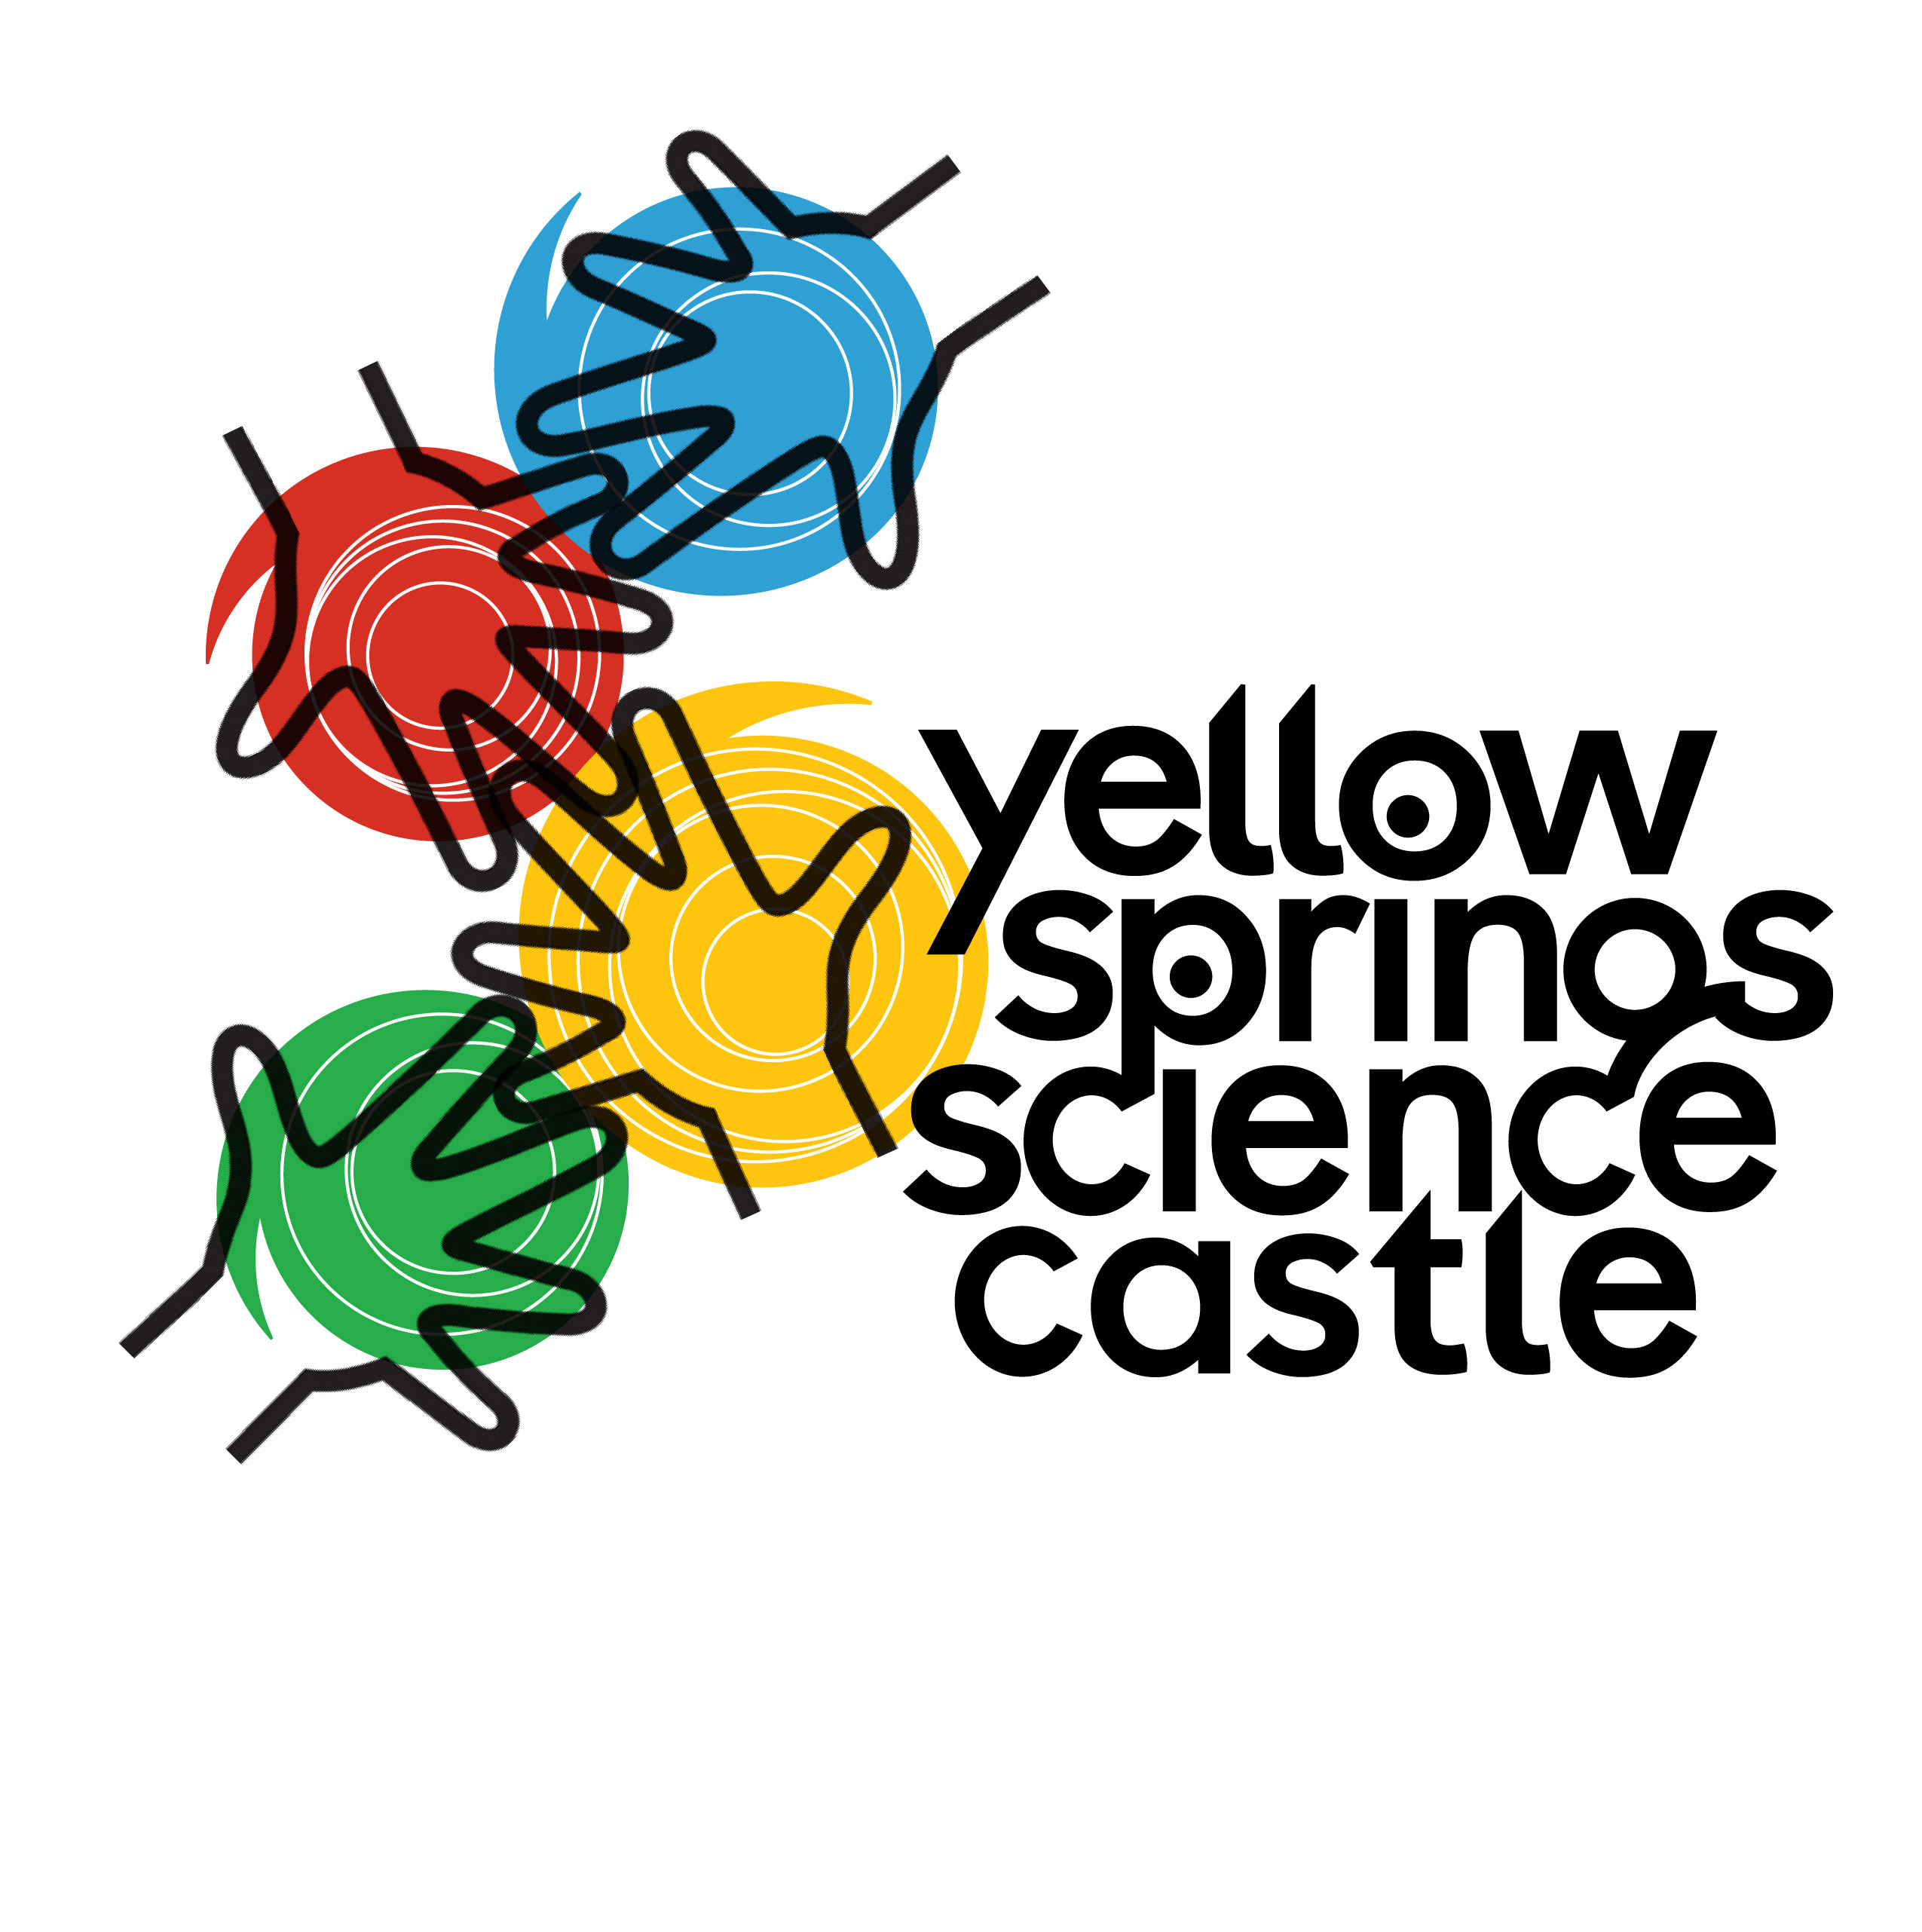 Yellow Springs Science Castle